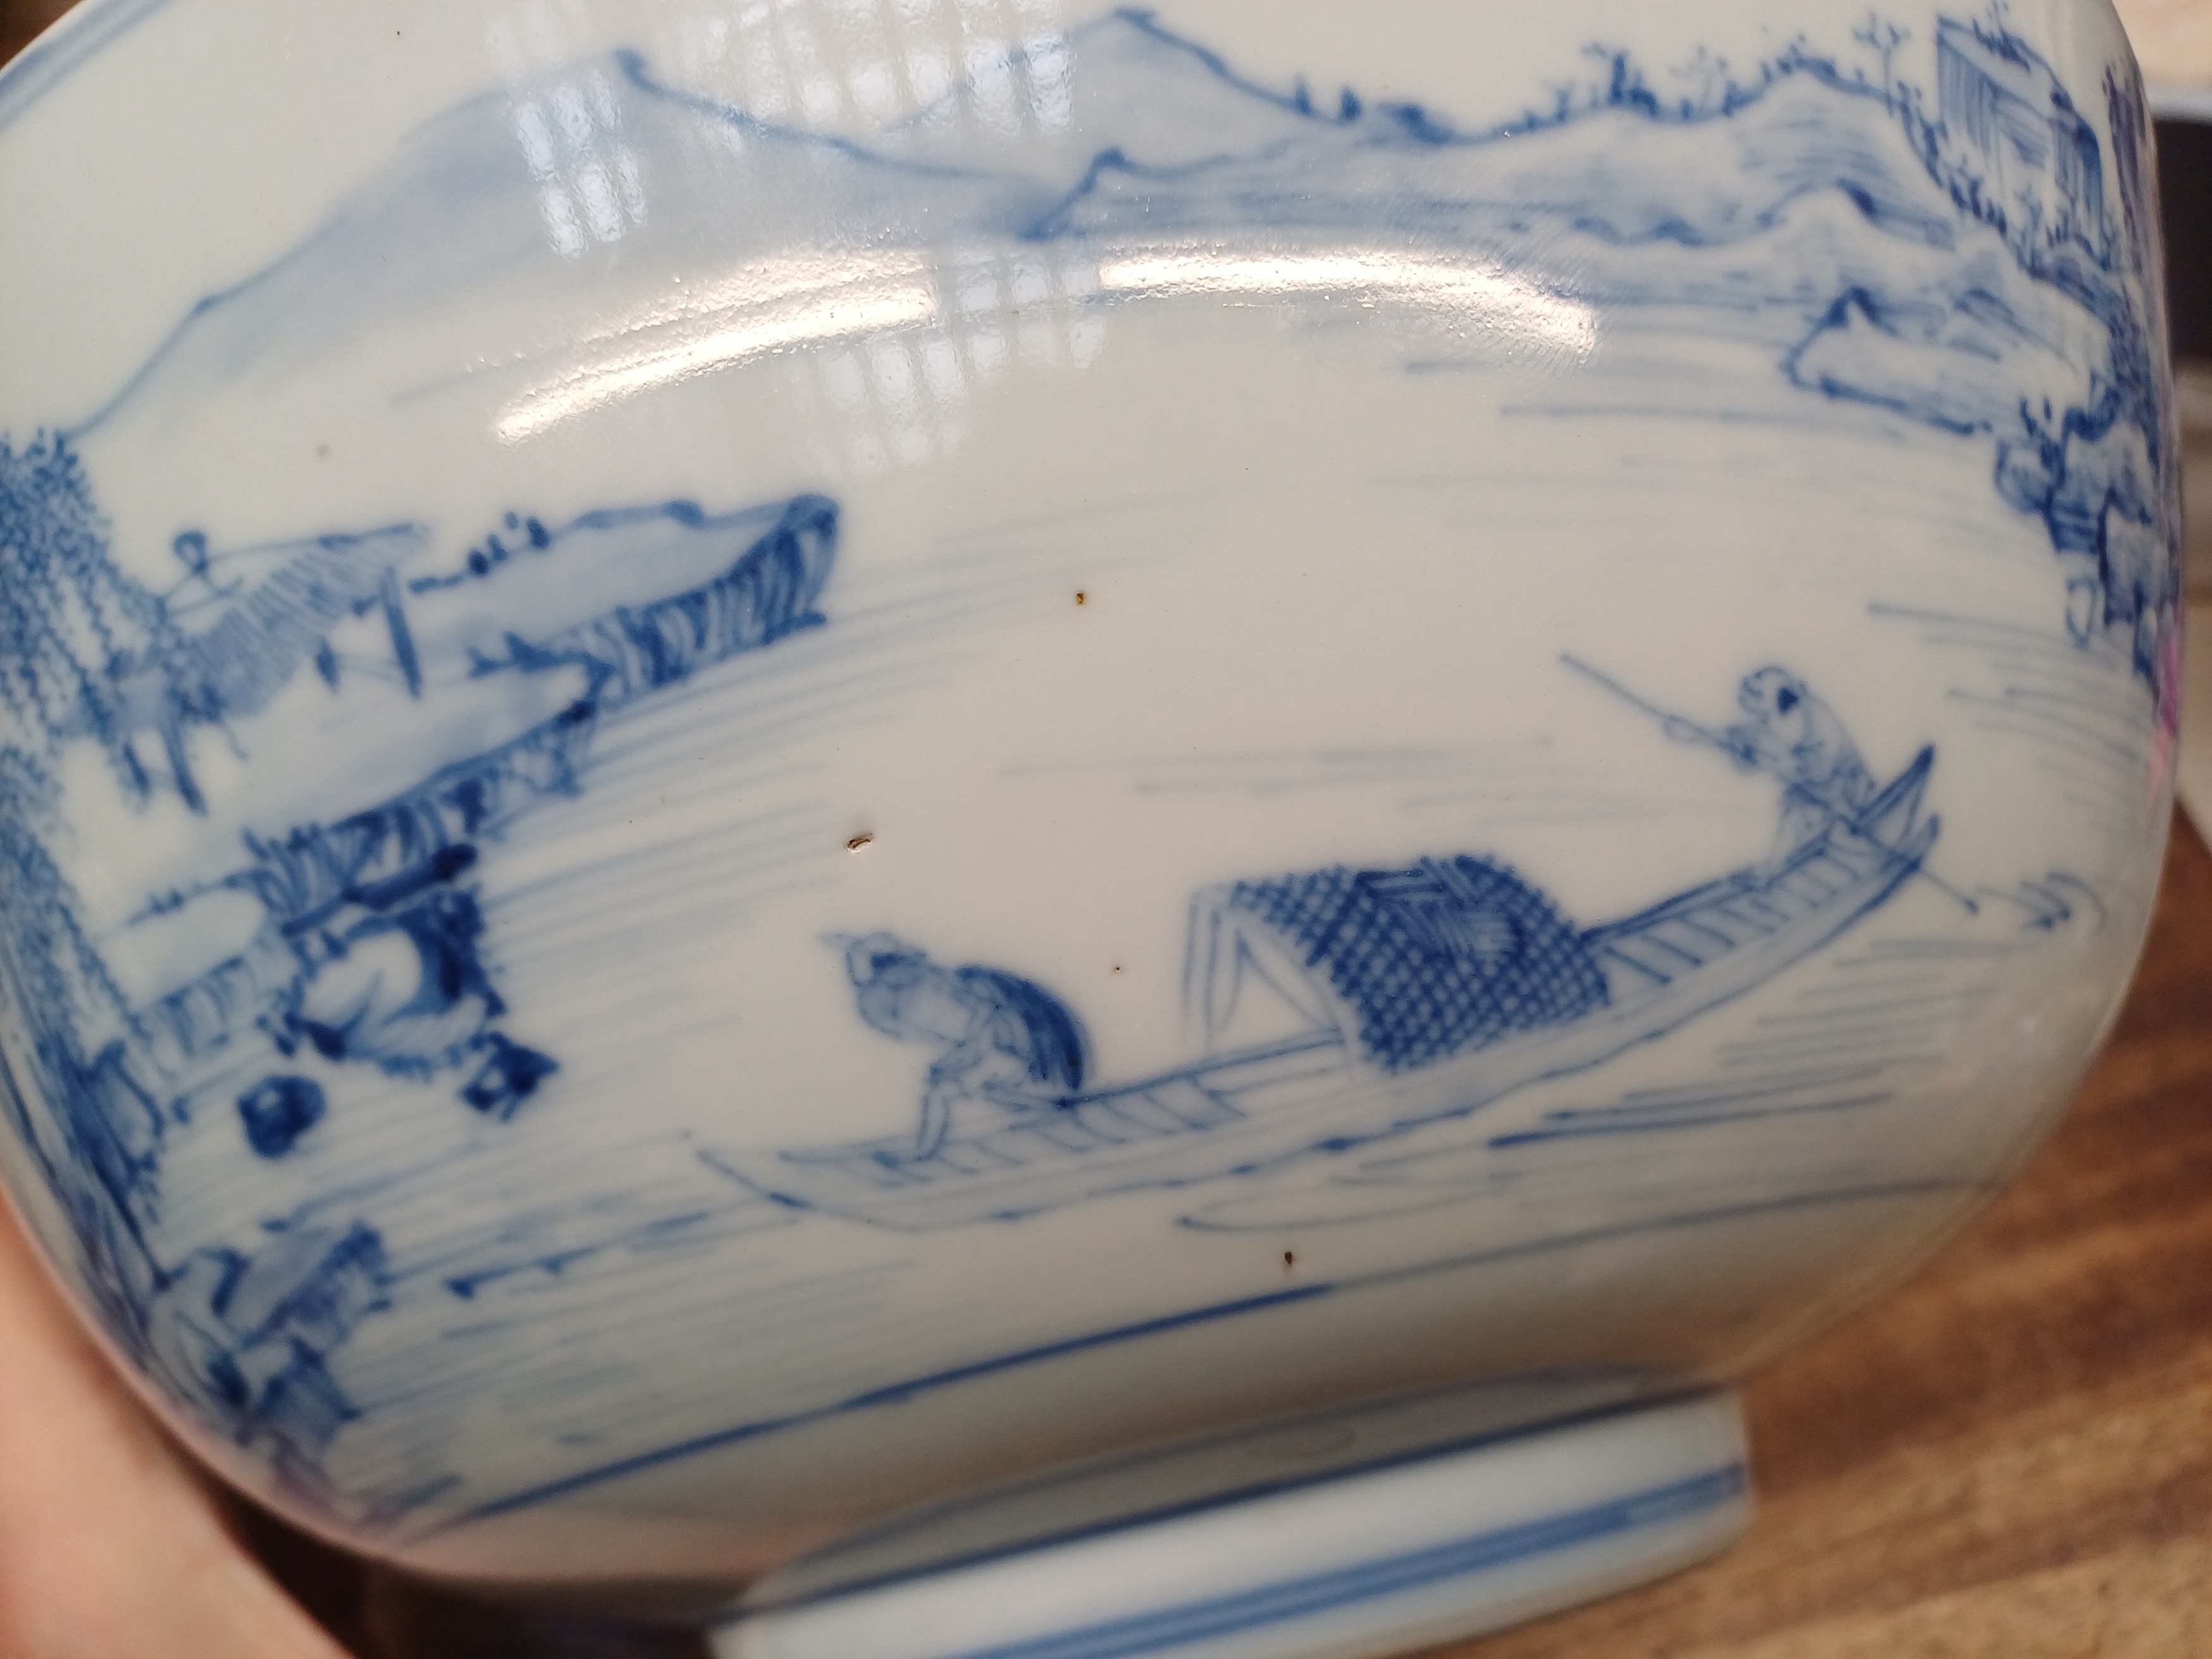 A RARE CHINESE BLUE AND WHITE 'MASTER OF THE ROCKS' BOWL 清康熙或雍正 青花山水人物圖紋盌 - Image 8 of 19